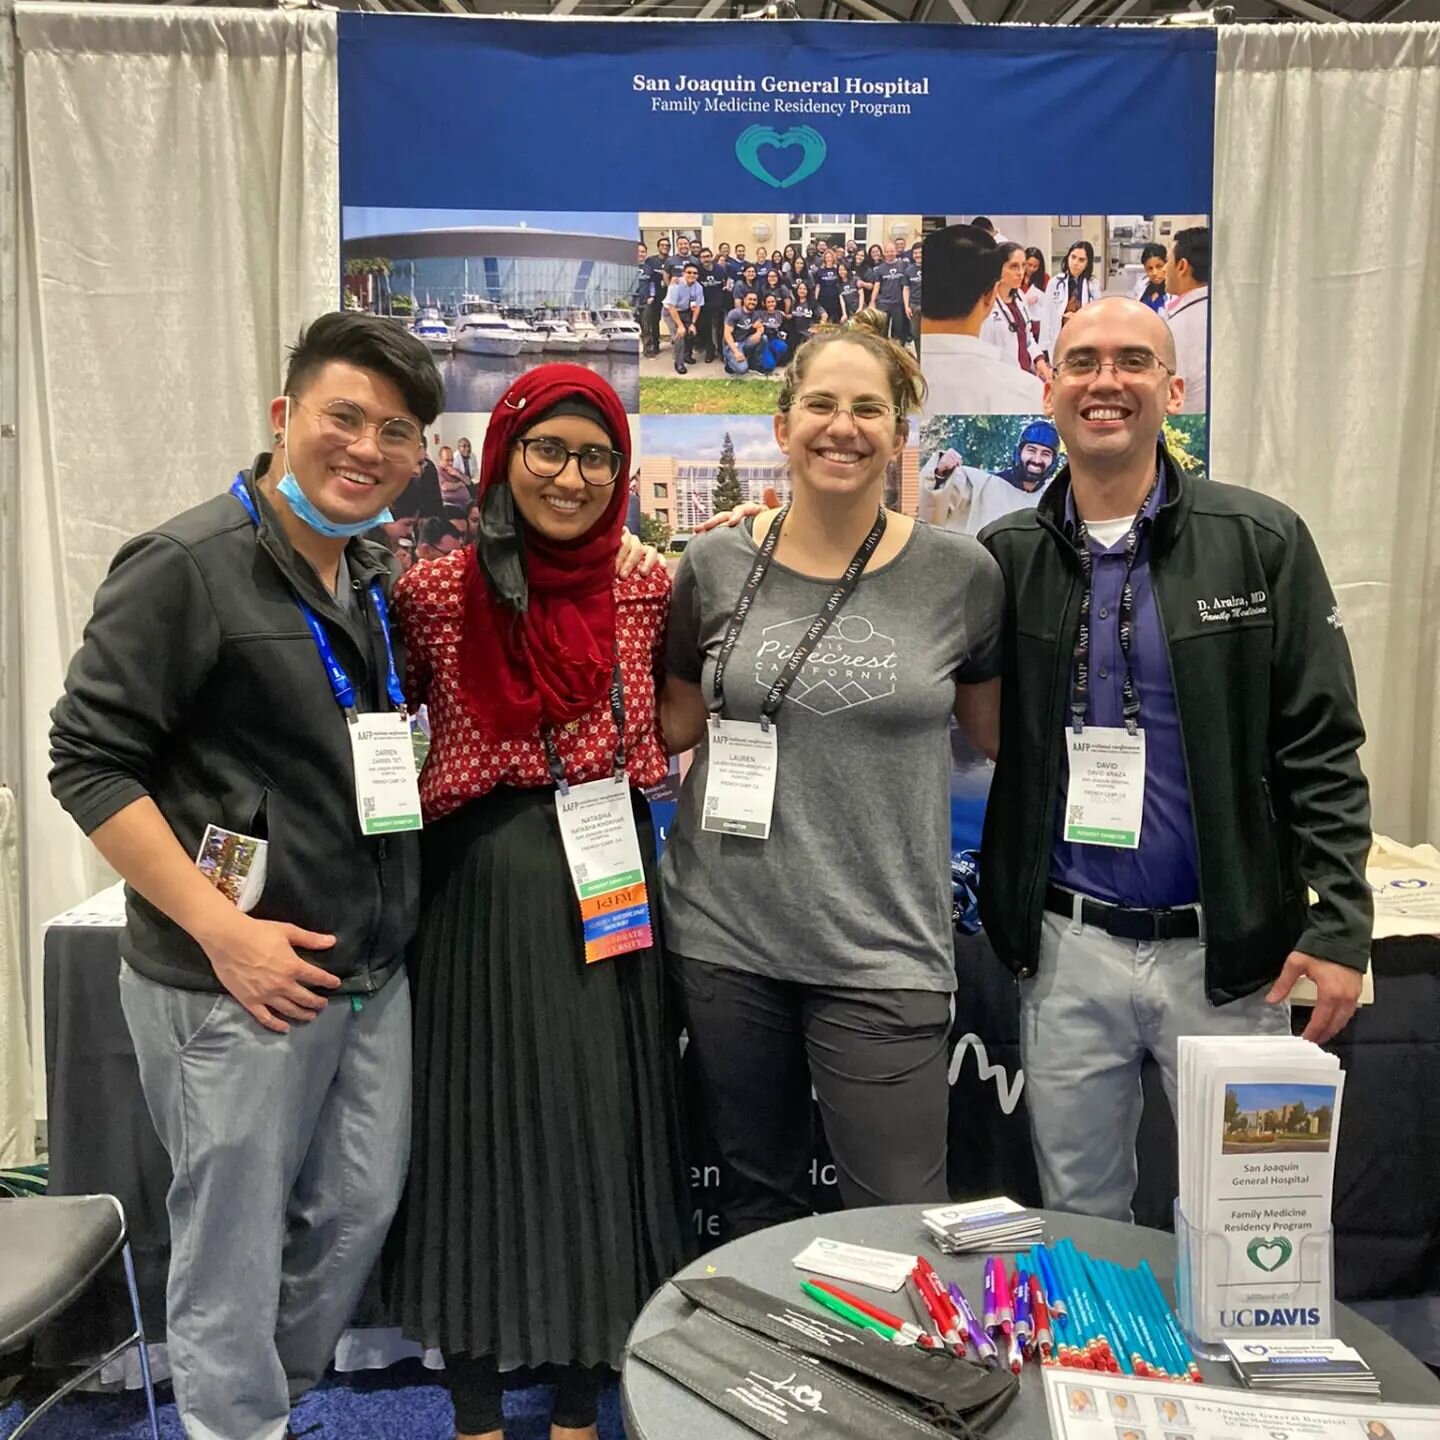 Come visit us at booth #1031 at the #AAFPNC to learn more about our program and commitment to serve our beautiful community in San Joaquin County!!! 👩🏽&zwj;⚕️🧑🏻&zwj;⚕️🏥👨🏽&zwj;🌾👩🏽&zwj;🔧👷🏽&zwj;♂️ #familymedicineresidency #fmrevolution